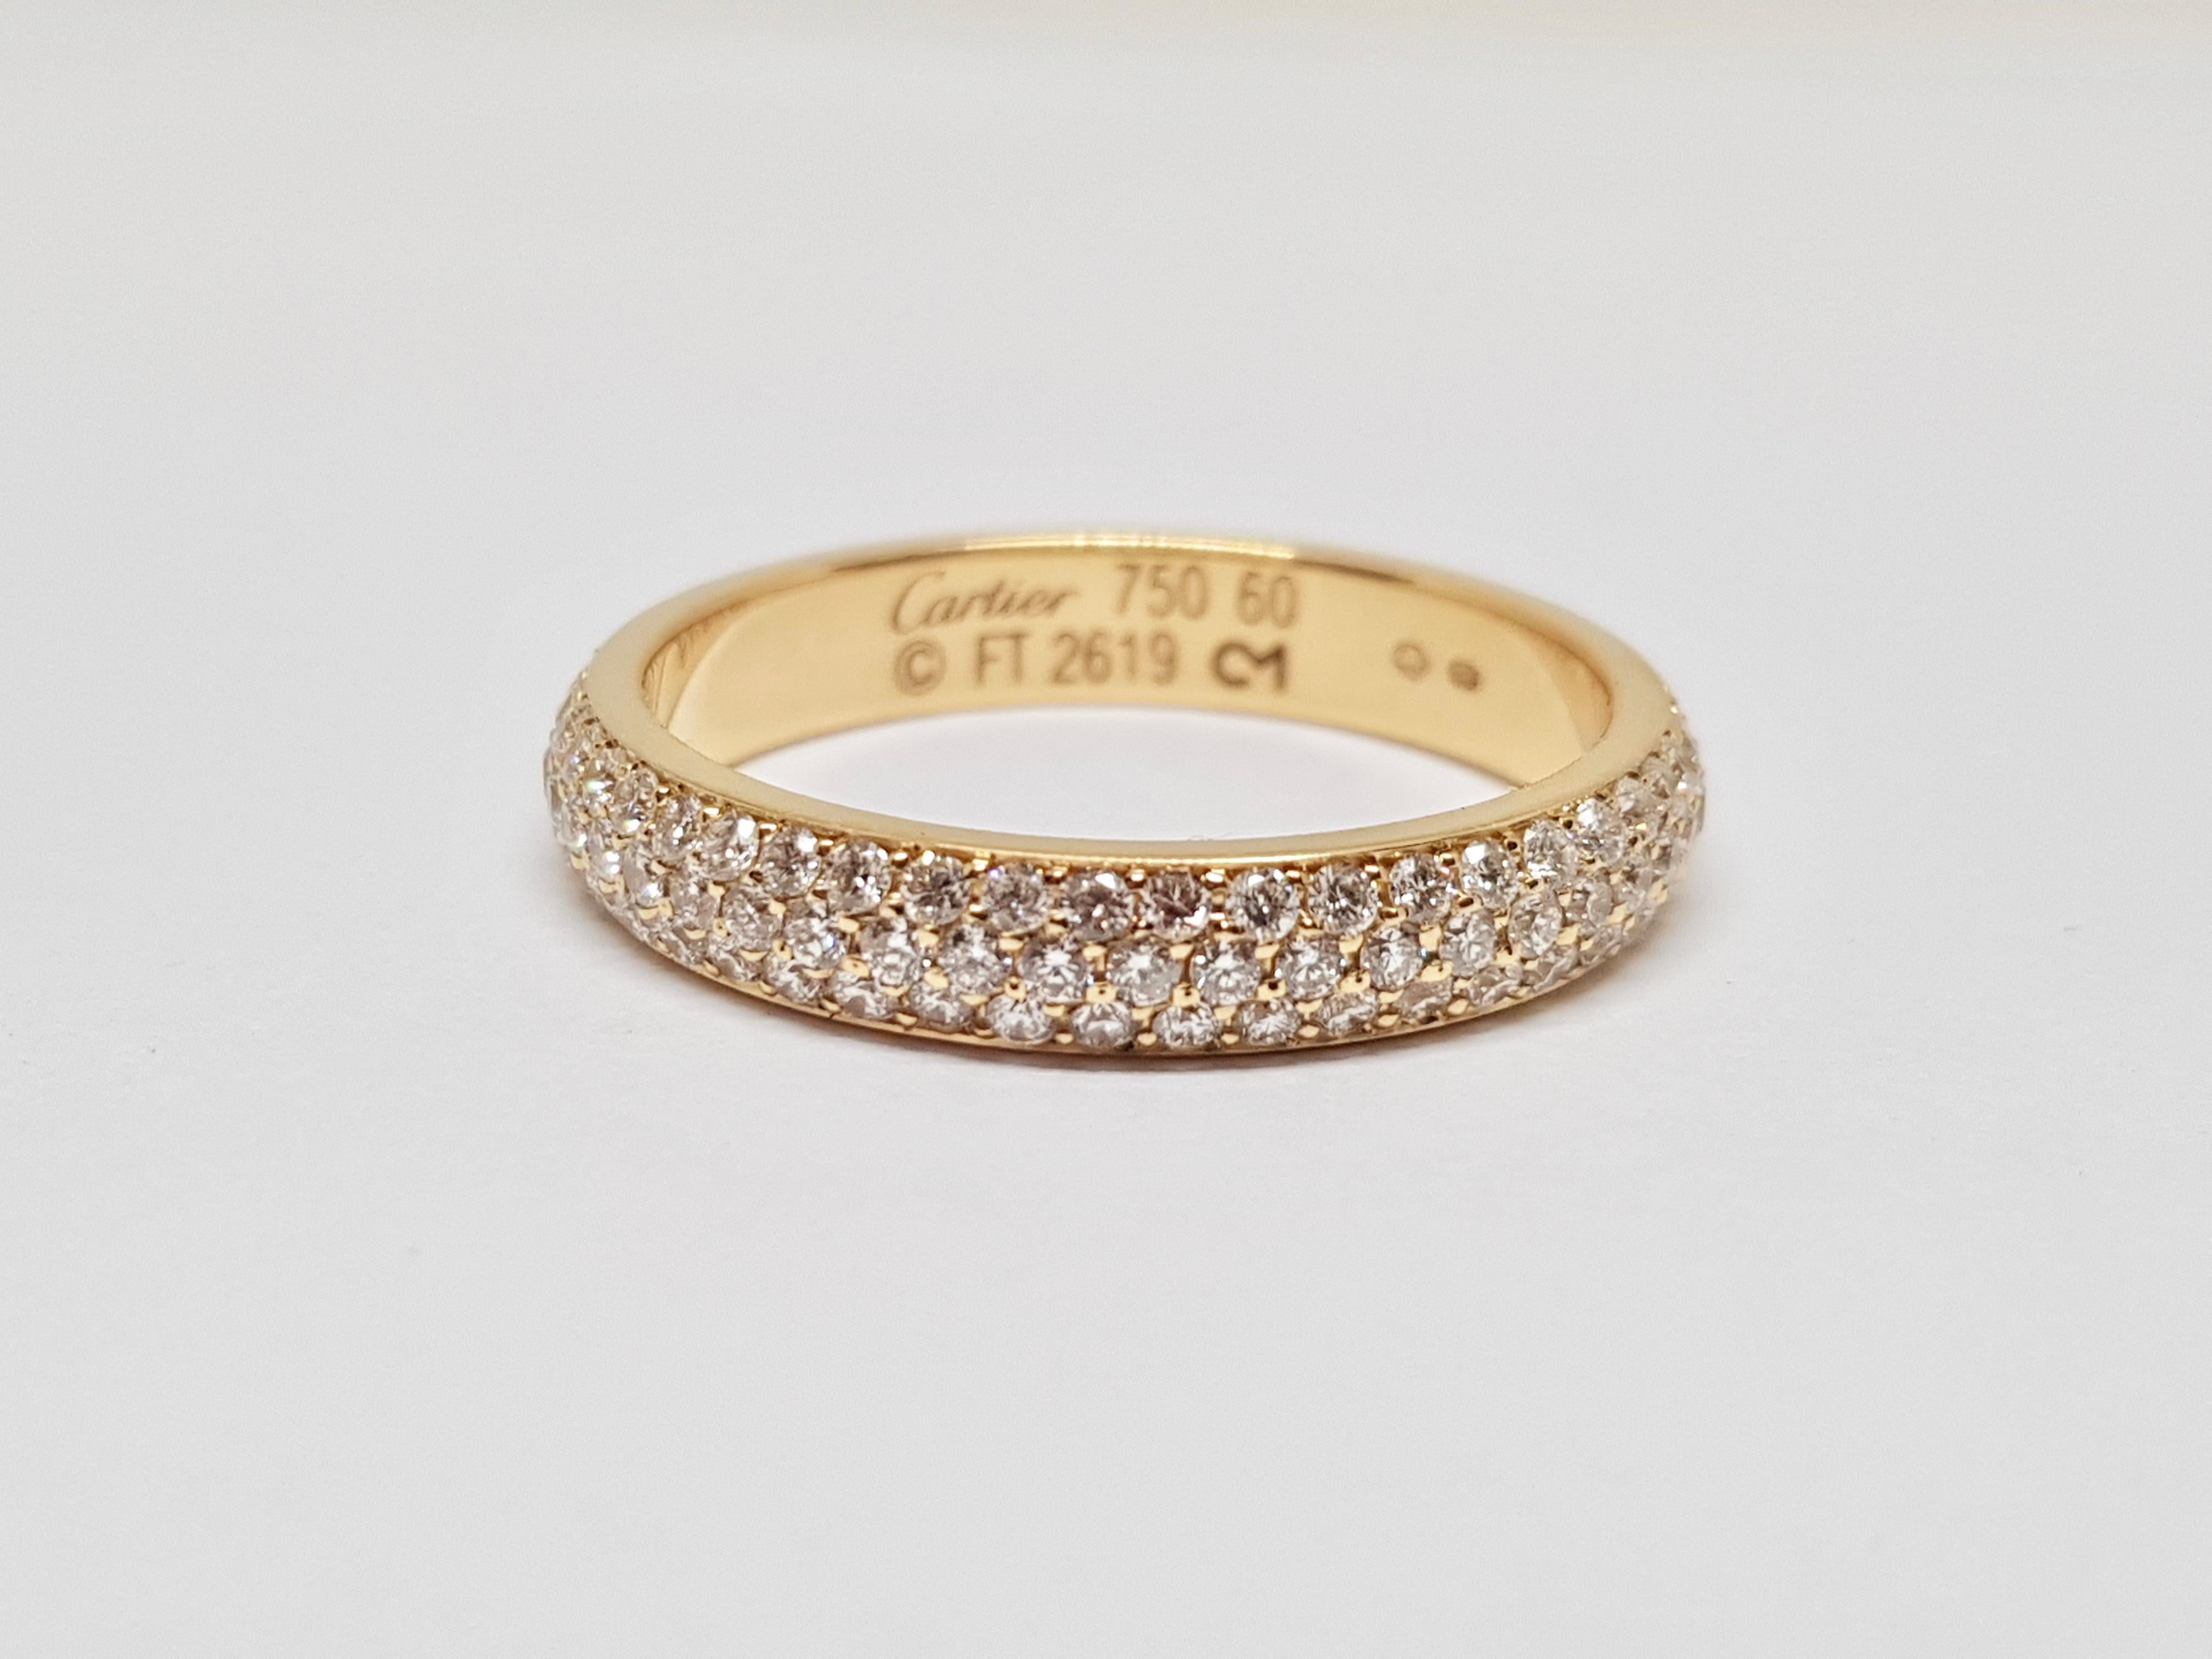 Signed Cartier 750 60 c FT 2619
Gold: 18 Carat Yellow Gold
Weight: 5.17 gr.
Diamonds: 1.38ct.
Ring Size: BE 60 / NL 19mm / US 9
Width: 0.4cm.
All our jewellery comes with a certificate and 5 years guarantee
Shipping: free worldwide insured